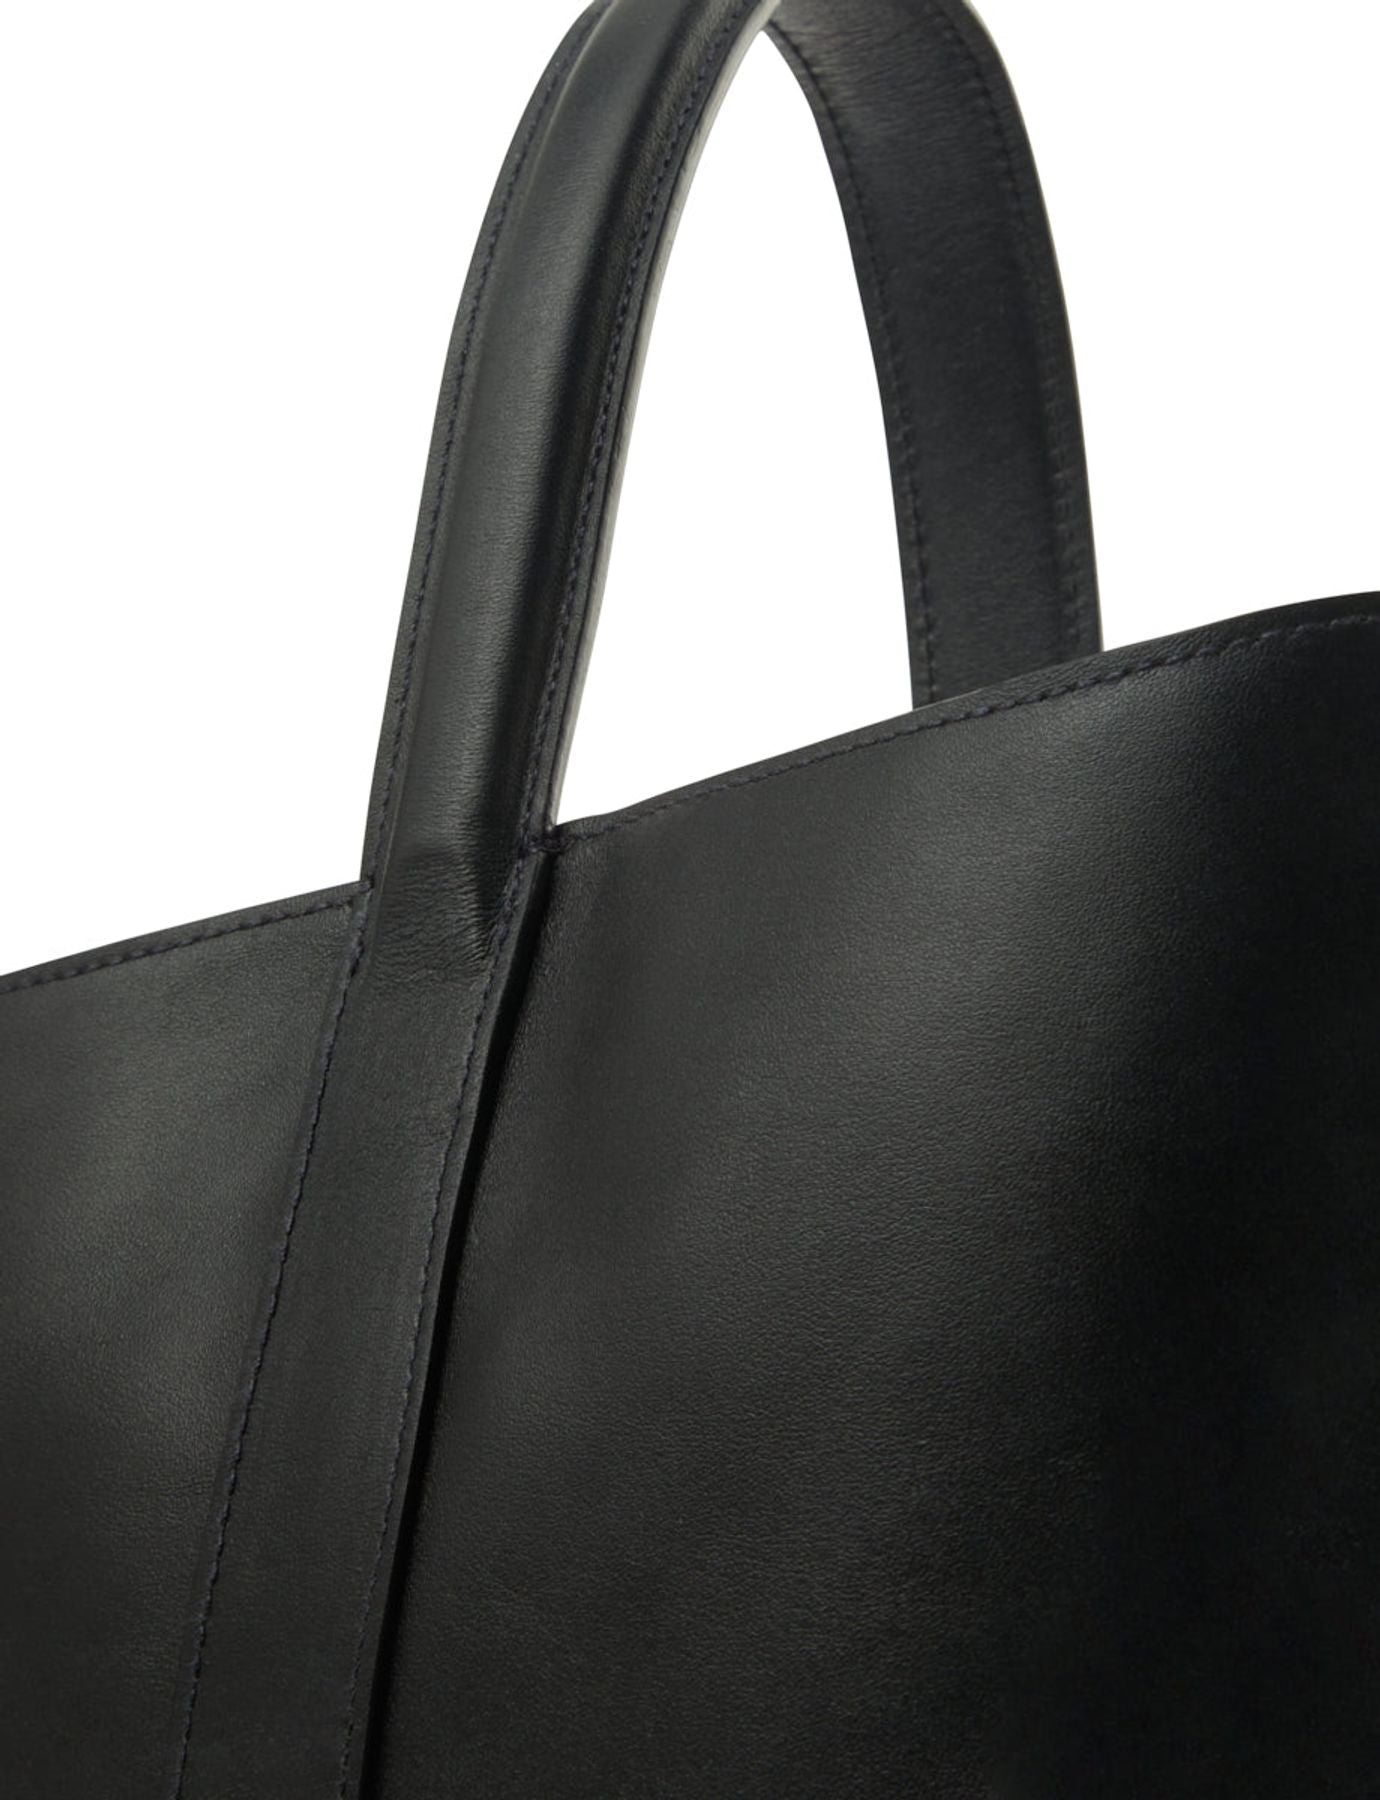 bag-bag-leather-leonore-small-format-black